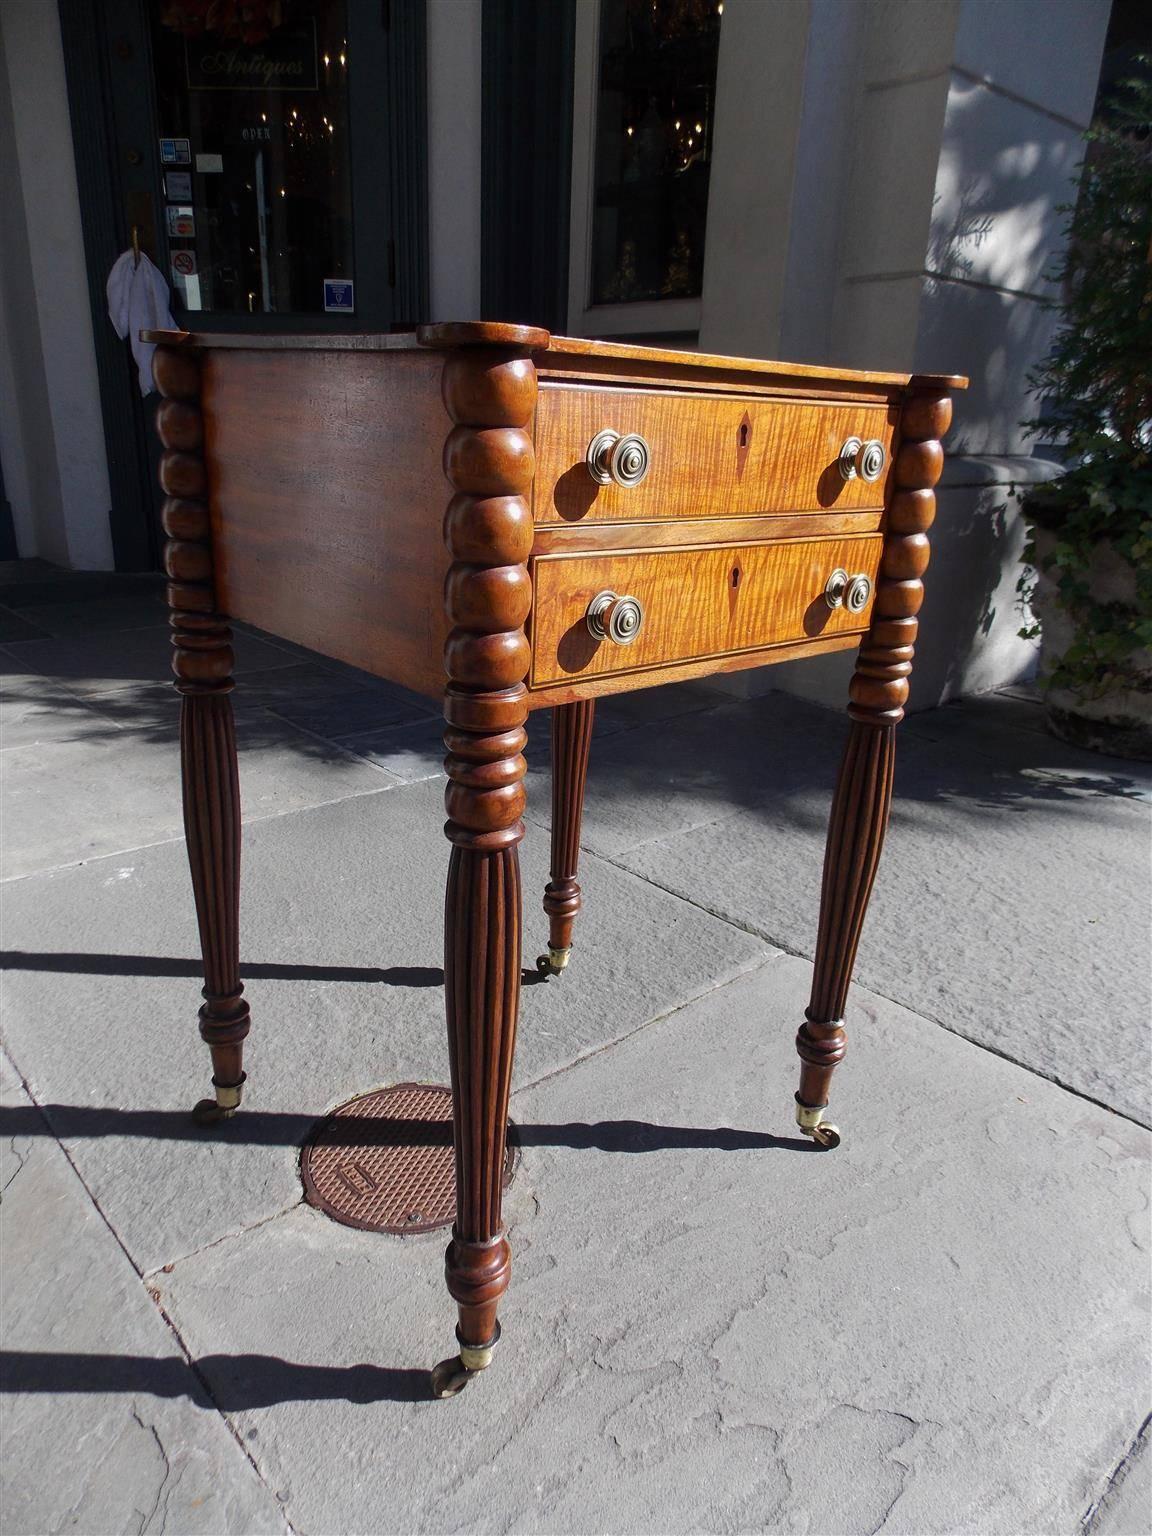 Hand-Carved American Mahogany and Tiger Maple Outset Corner Stand with Reeded Legs, C. 1810